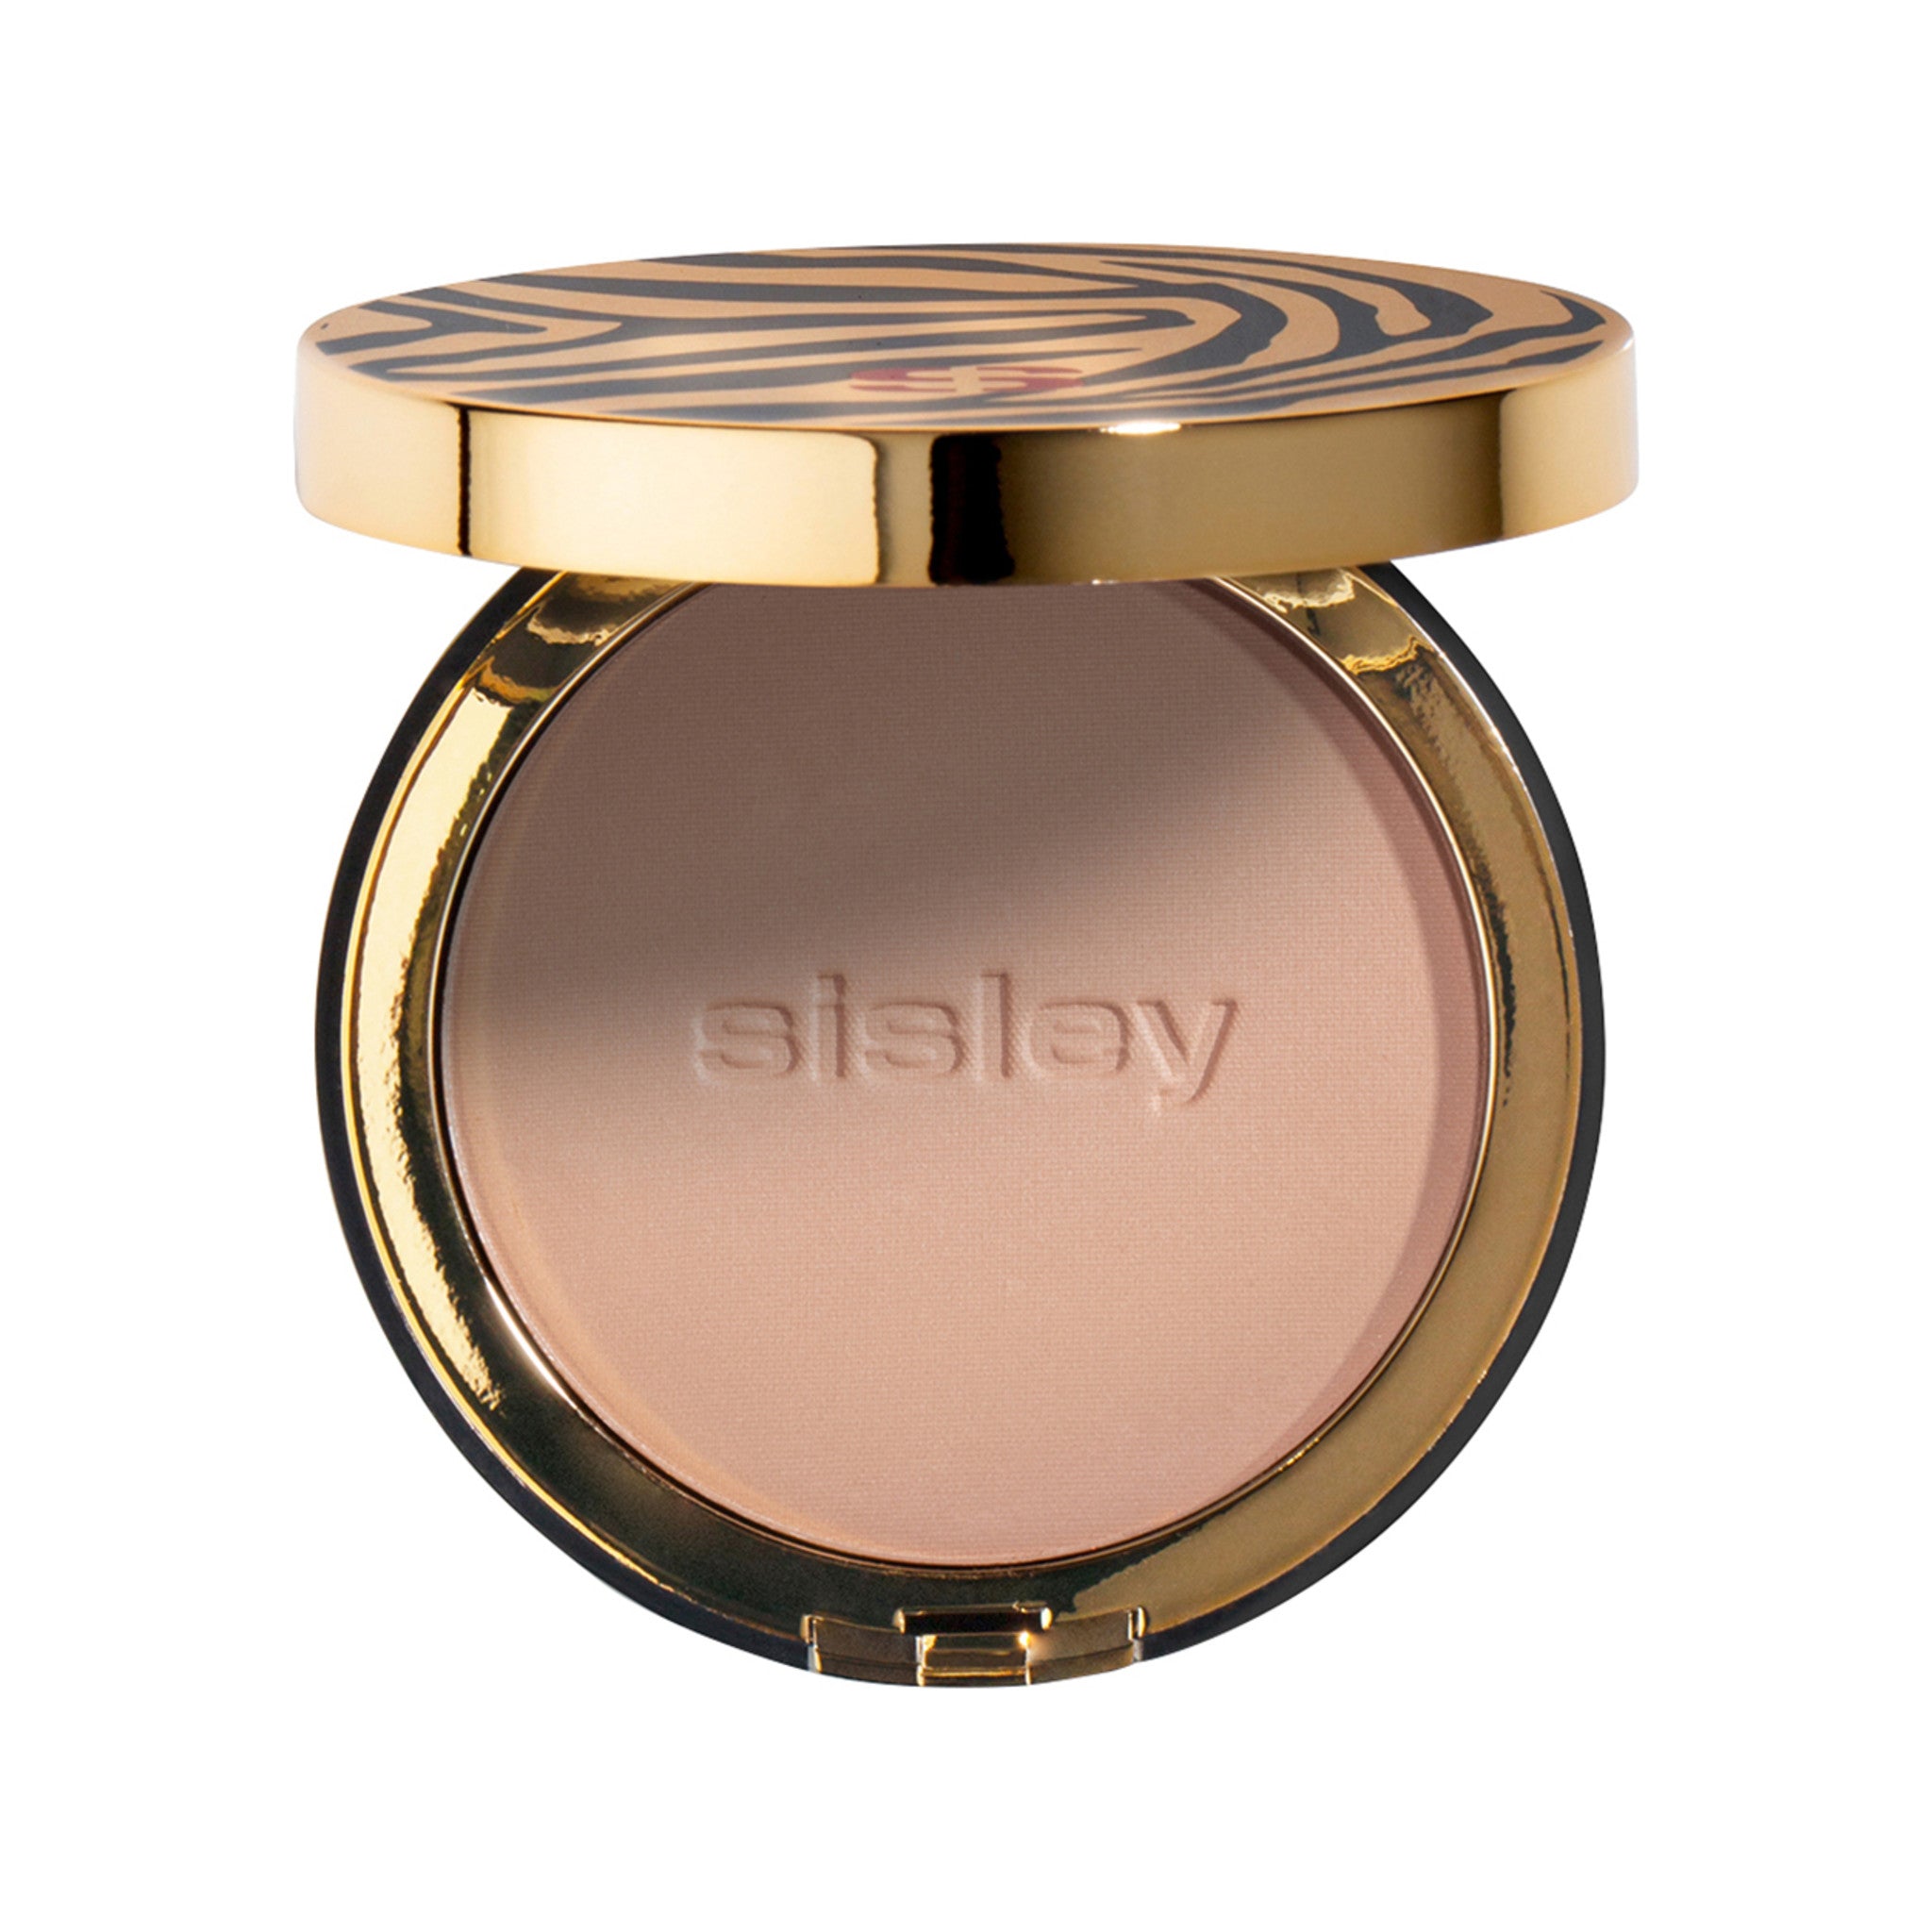 Sisley-Paris Phyto-Poudre Compacte Color/Shade variant: 1 Rosy main image.